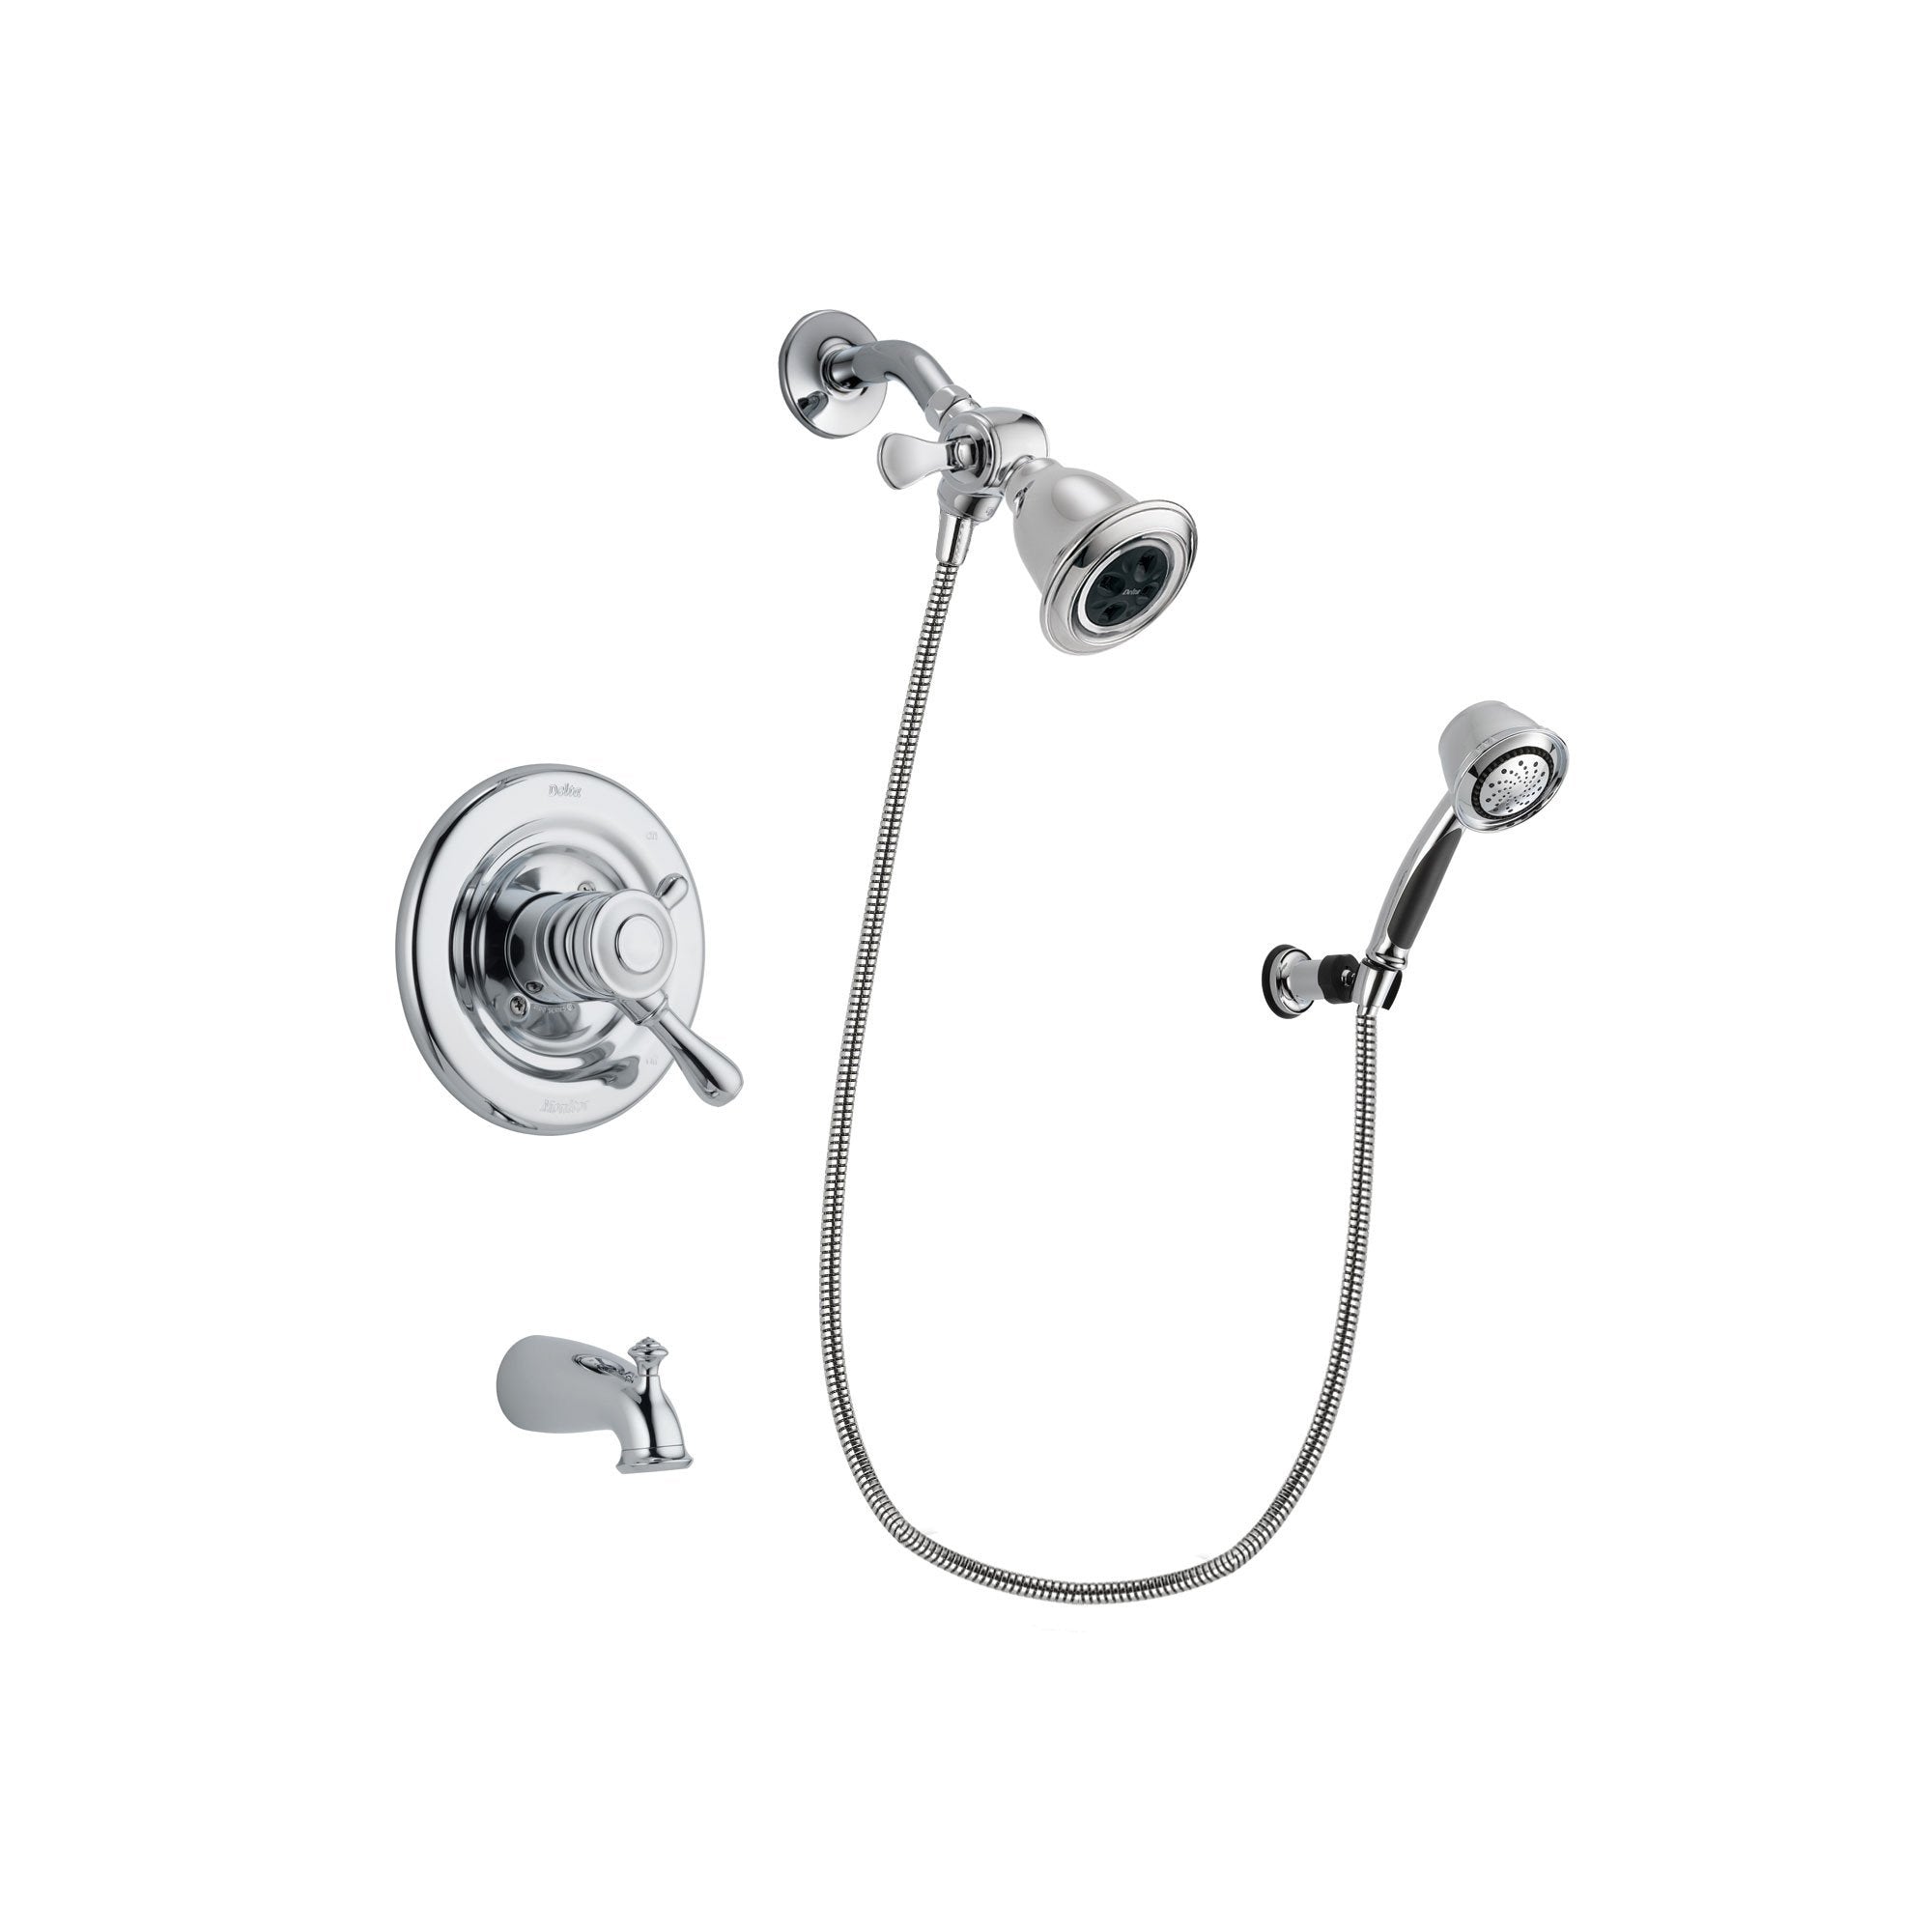 Delta Leland Chrome Finish Dual Control Tub and Shower Faucet System Package with Water Efficient Showerhead and 5-Spray Adjustable Wall Mount Hand Shower Includes Rough-in Valve and Tub Spout DSP0349V